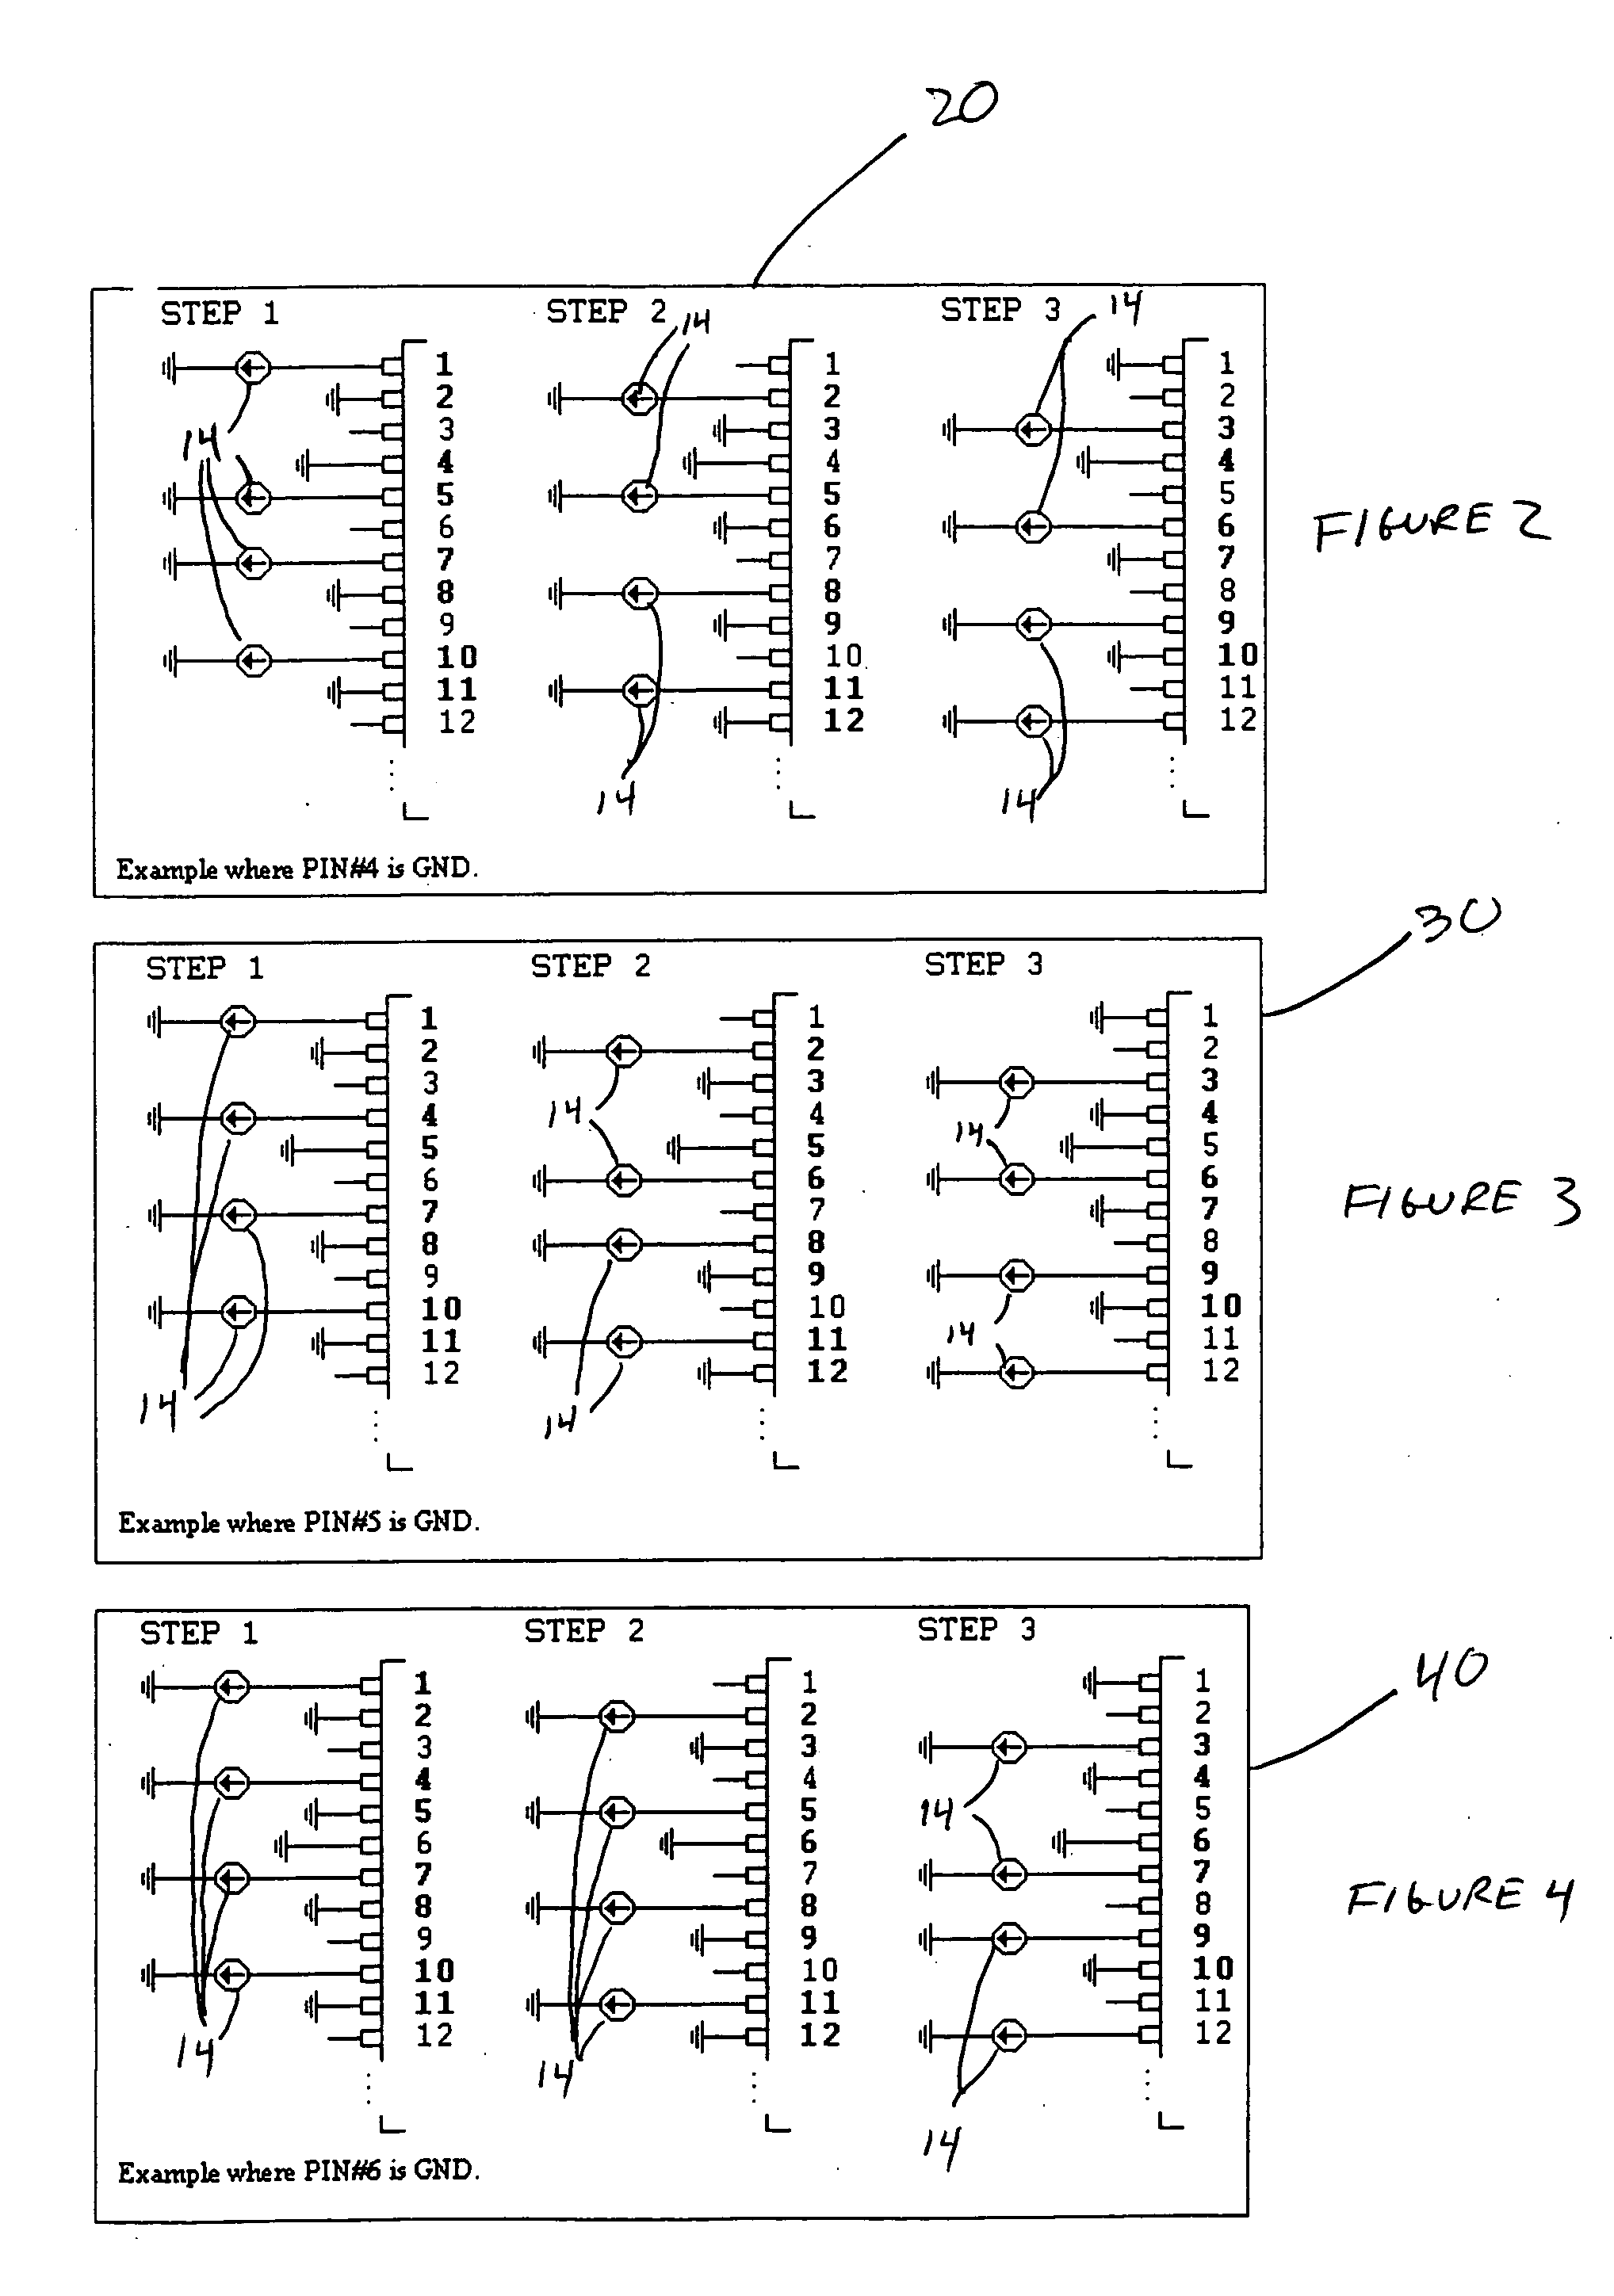 Simultaneous pin short and continuity test on IC packages